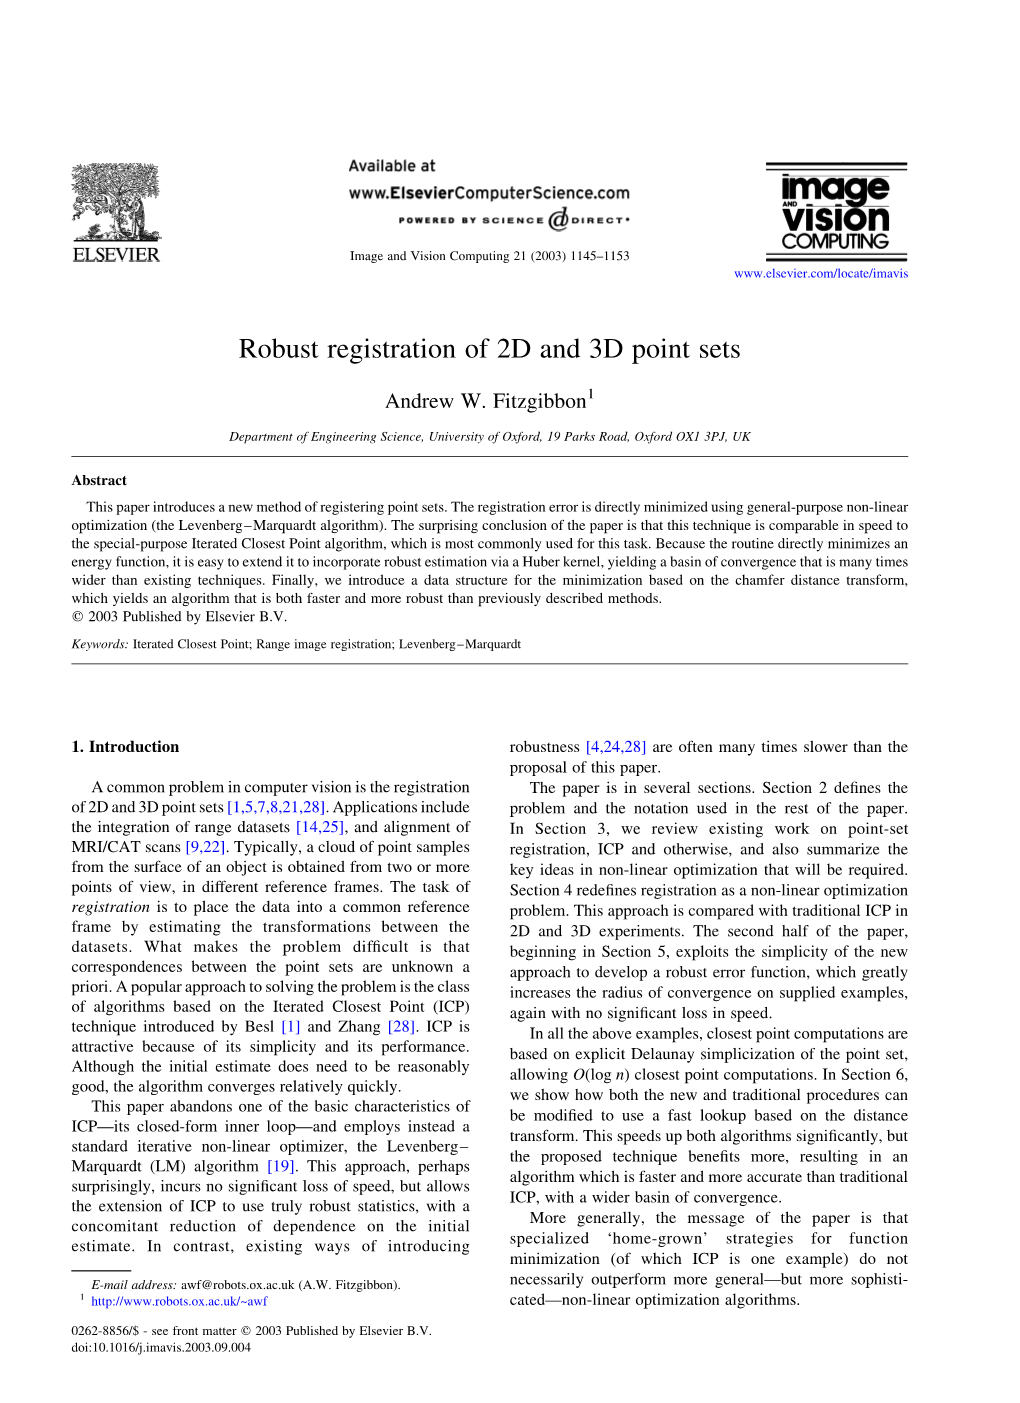 Robust Registration of 2D and 3D Point Sets